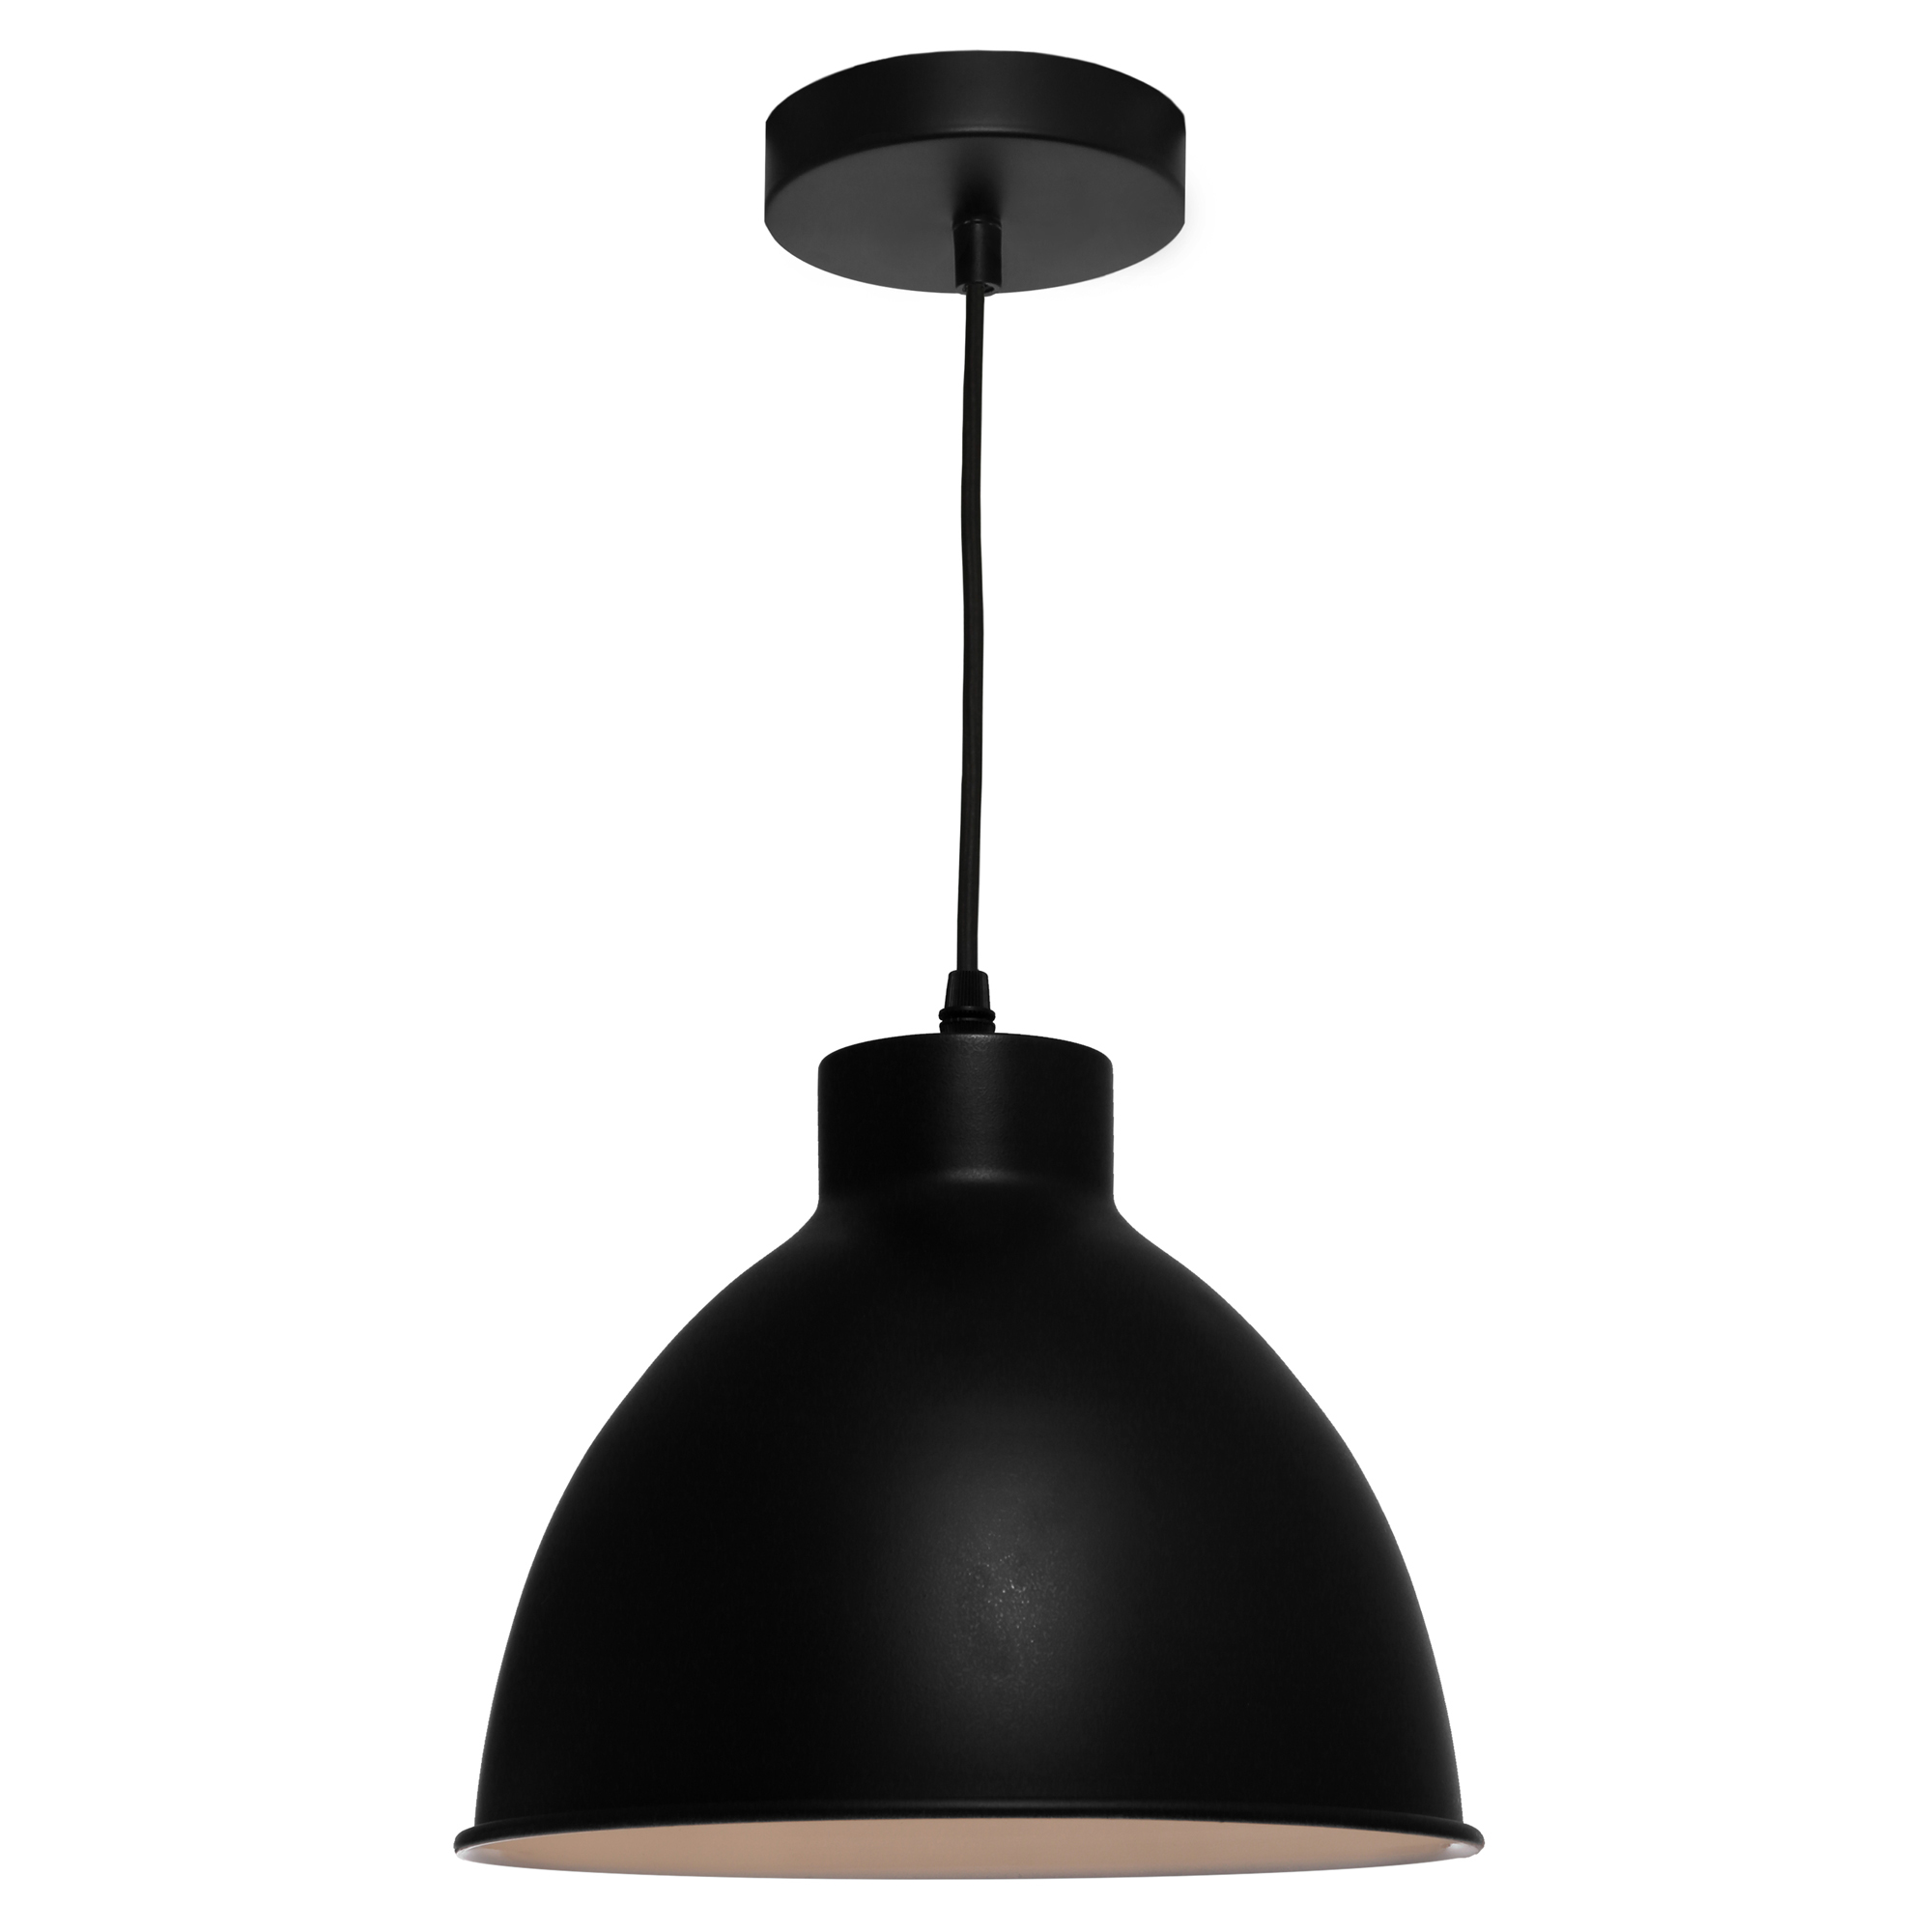 dome ceiling light